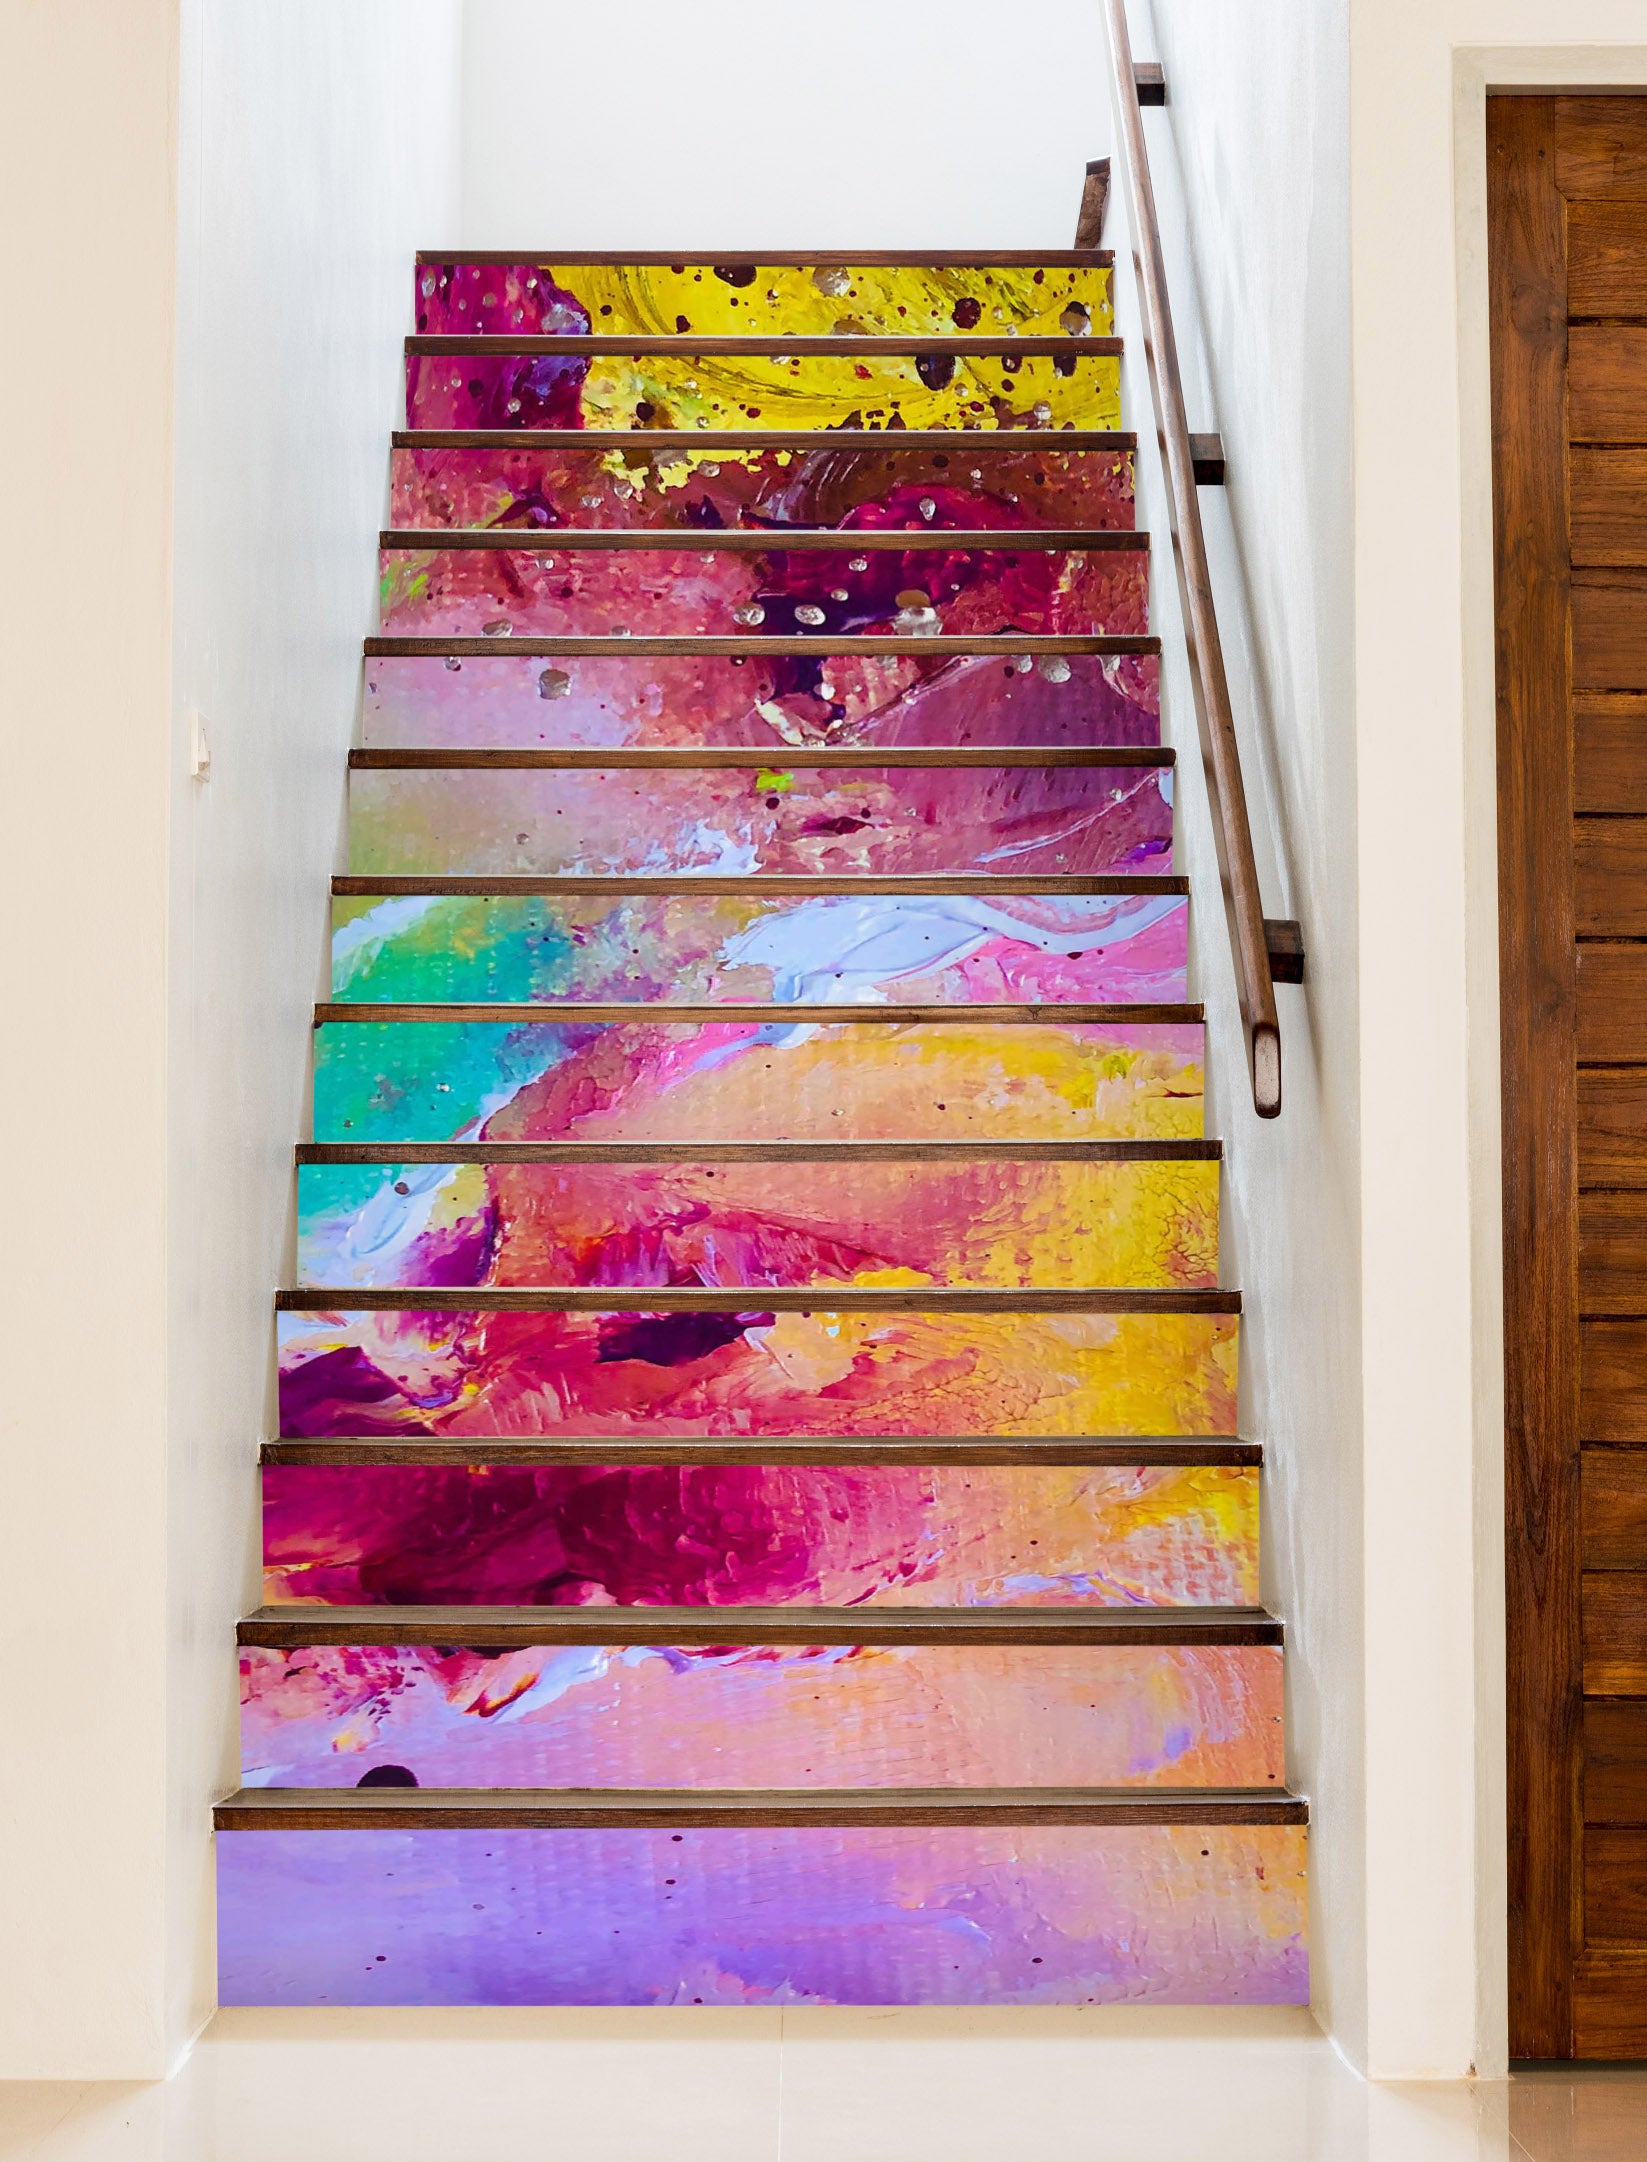 3D Color Painting 2232 Skromova Marina Stair Risers